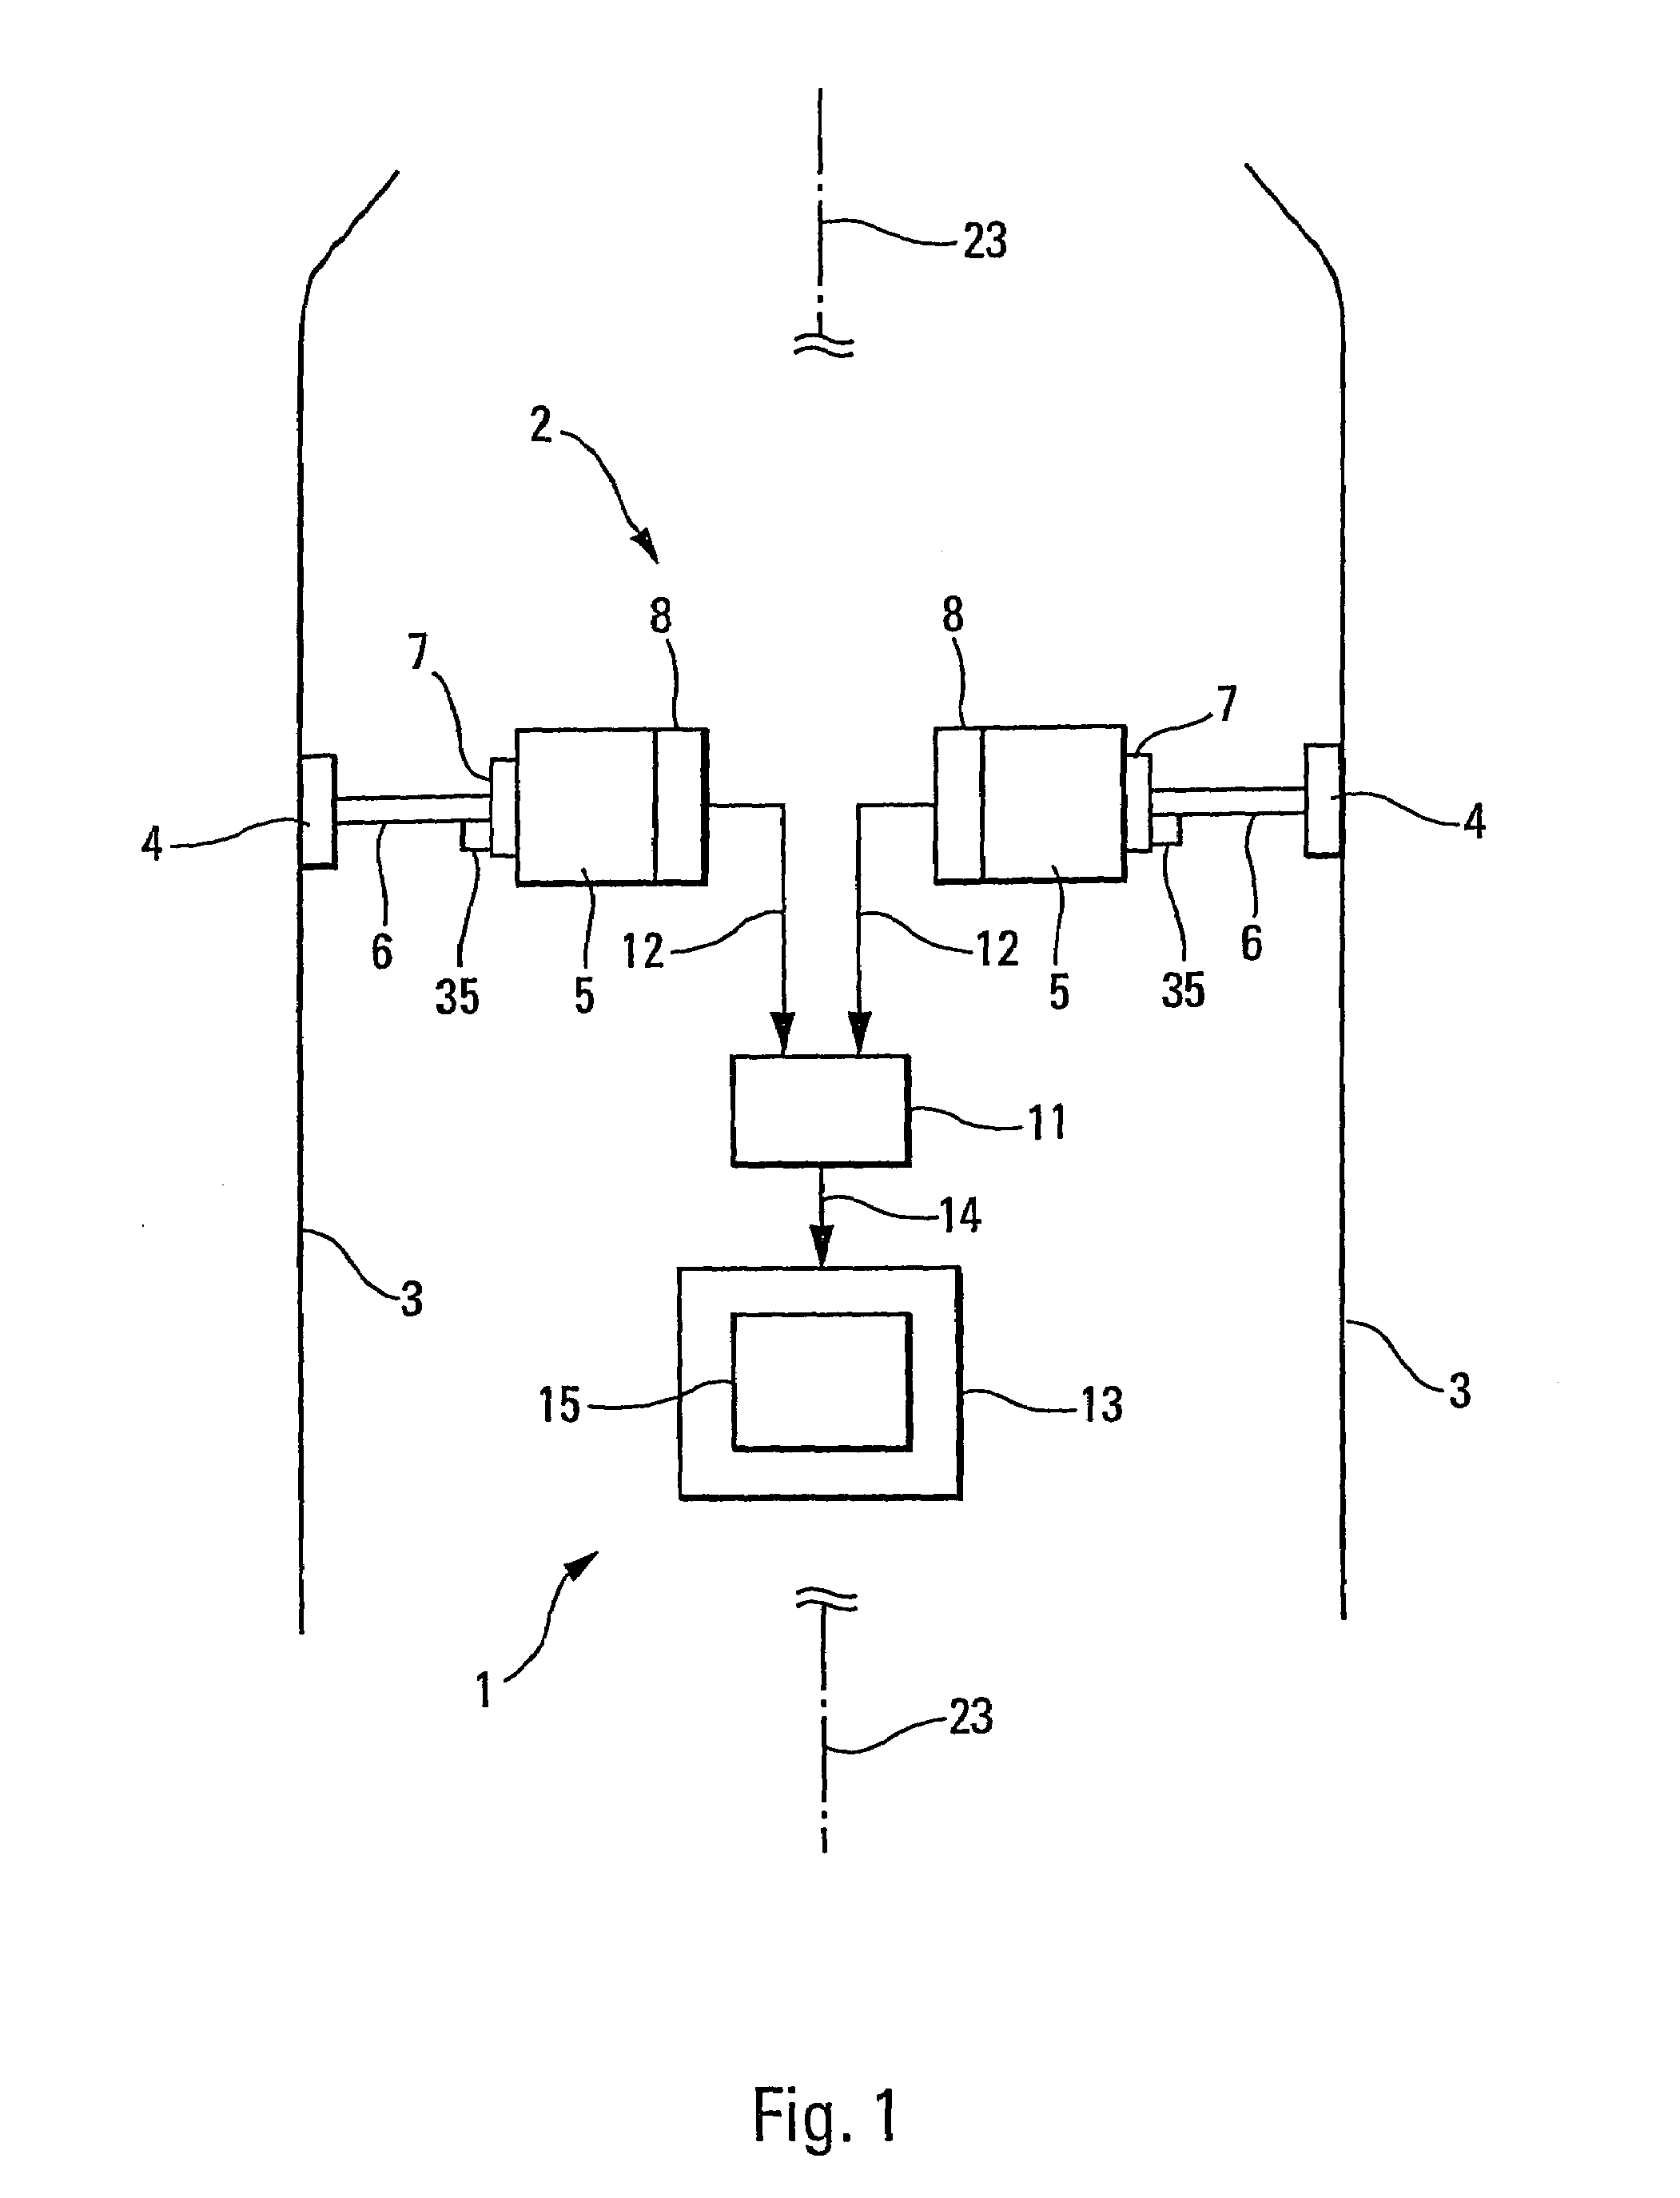 Process and device for detecting the failure of a pressure sensor of an air data system of an aircraft